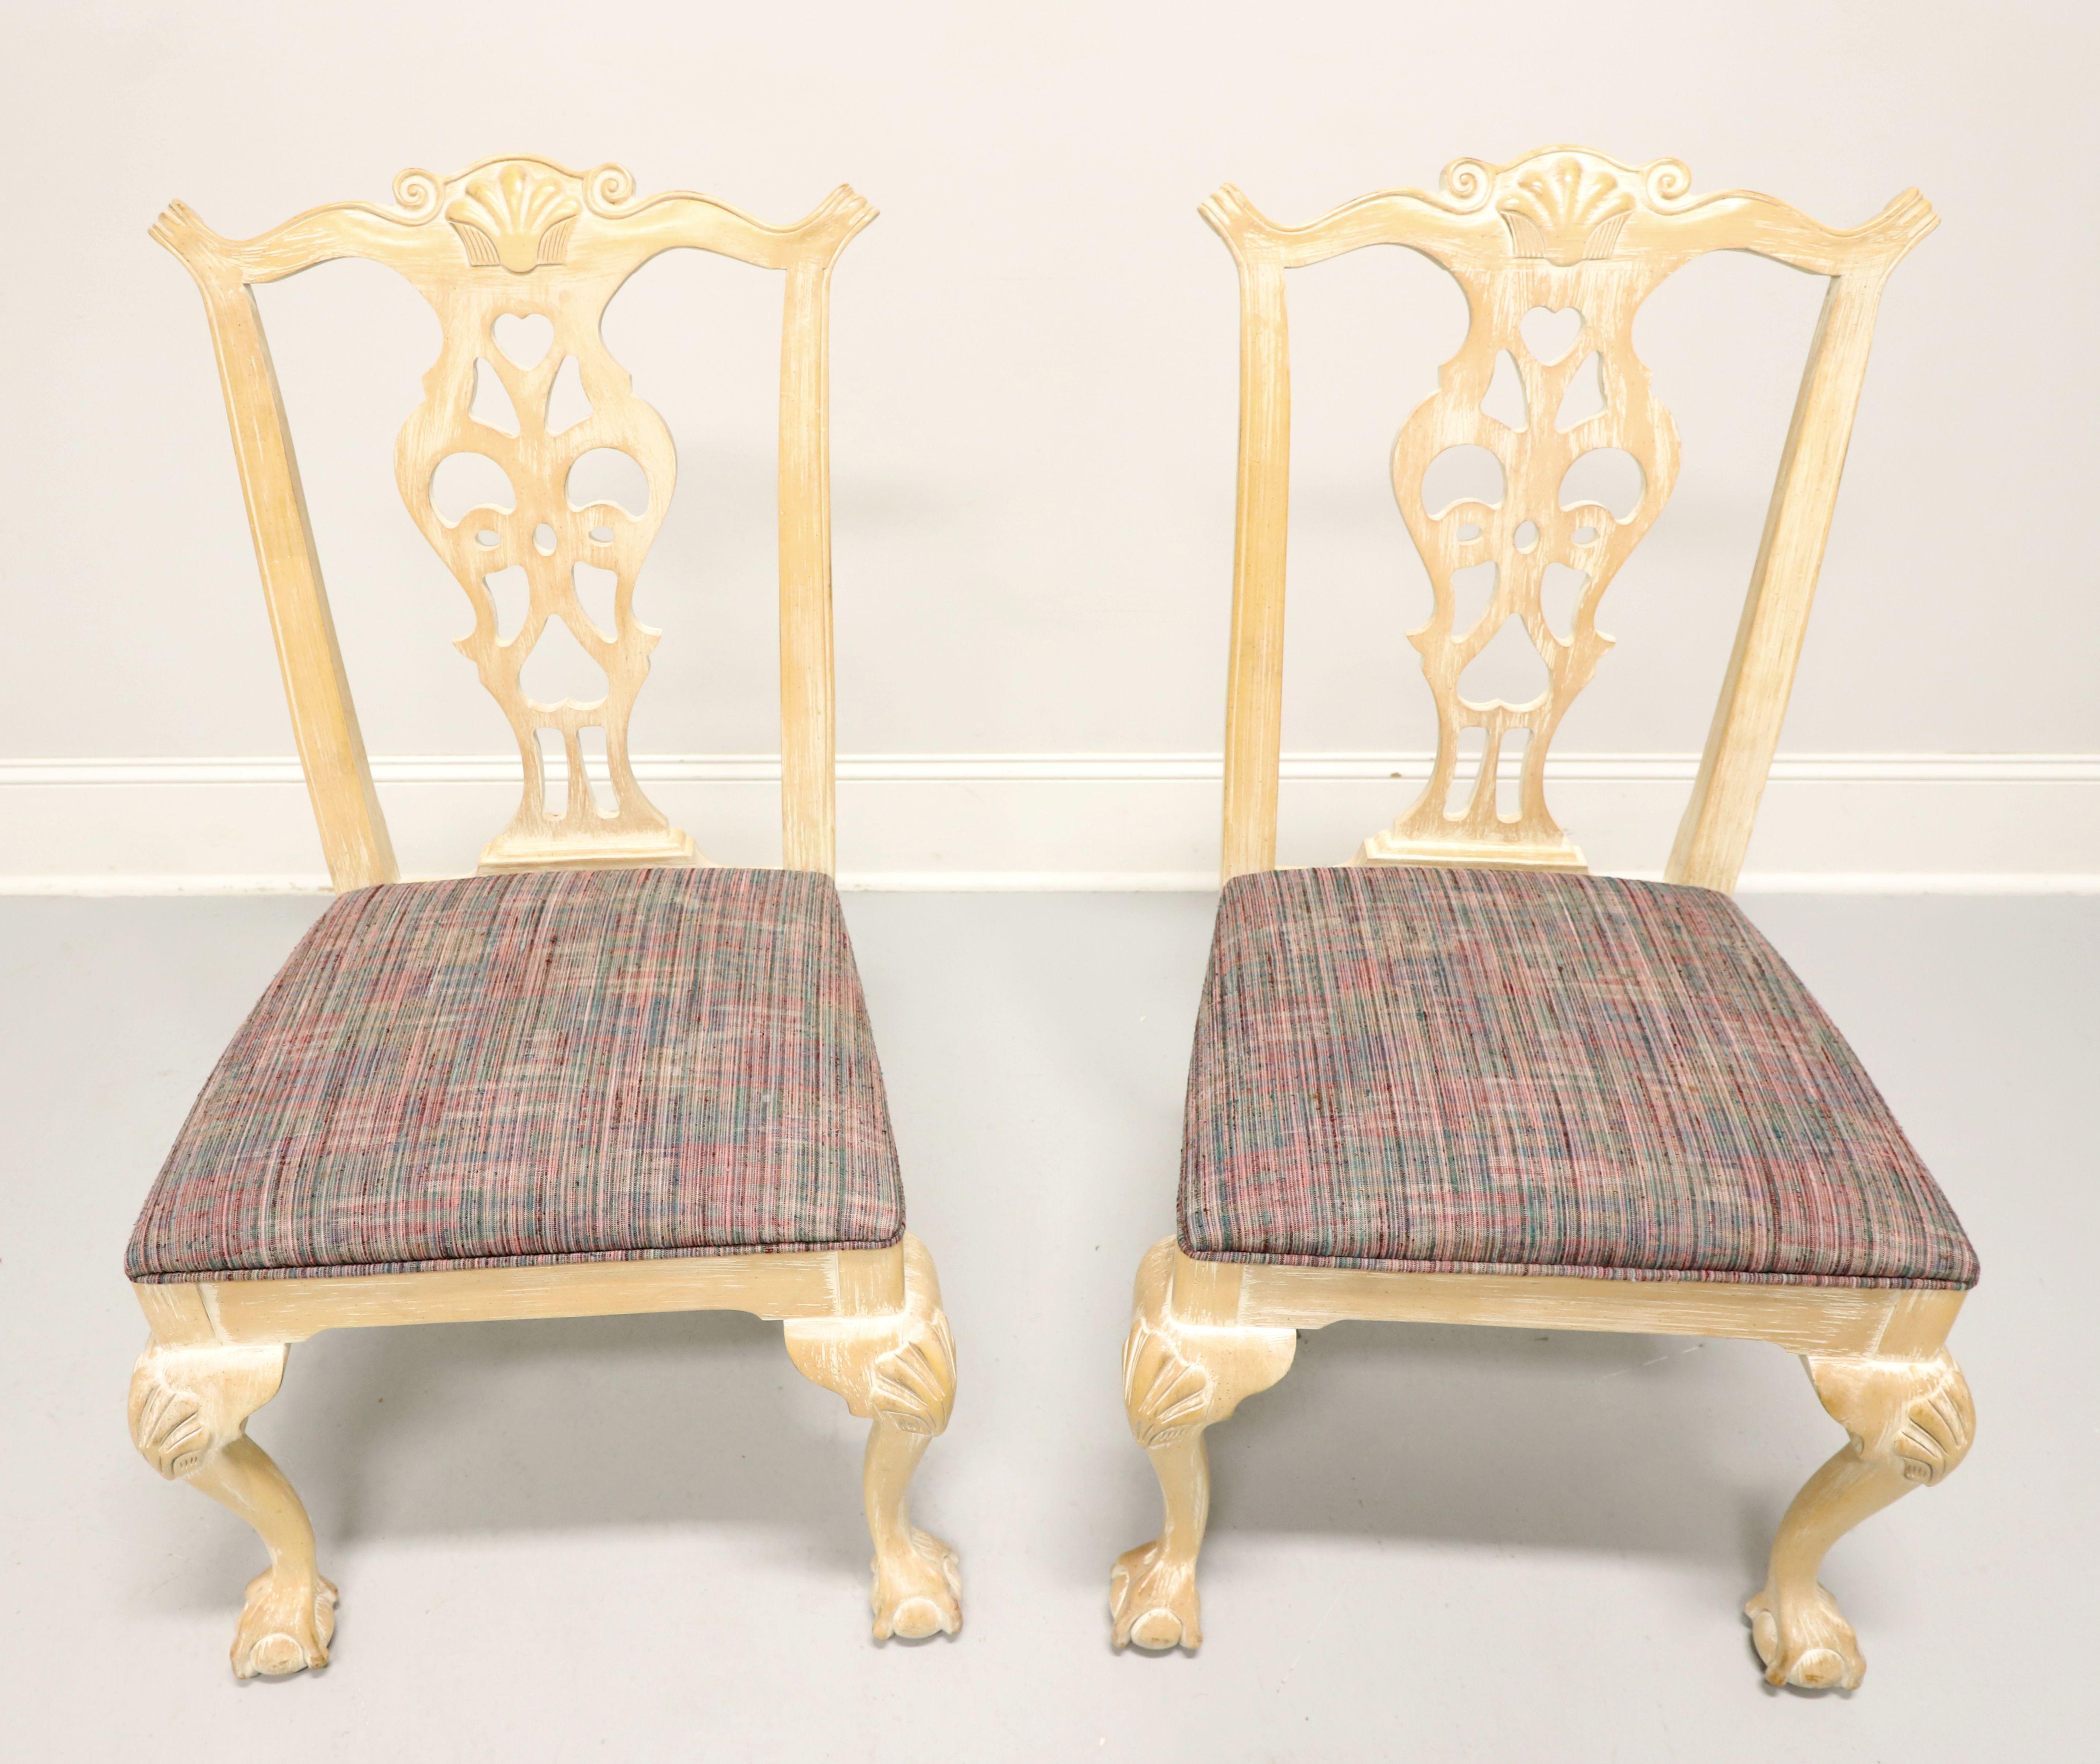 A pair of dining side chairs in the Chippendale style by Century Furniture. Solid hardwood with scrubbed white & distressed finish, carved backrest, multi-color fabric upholstered seat, carved knees, cabriole legs, and ball in claw feet. Made in